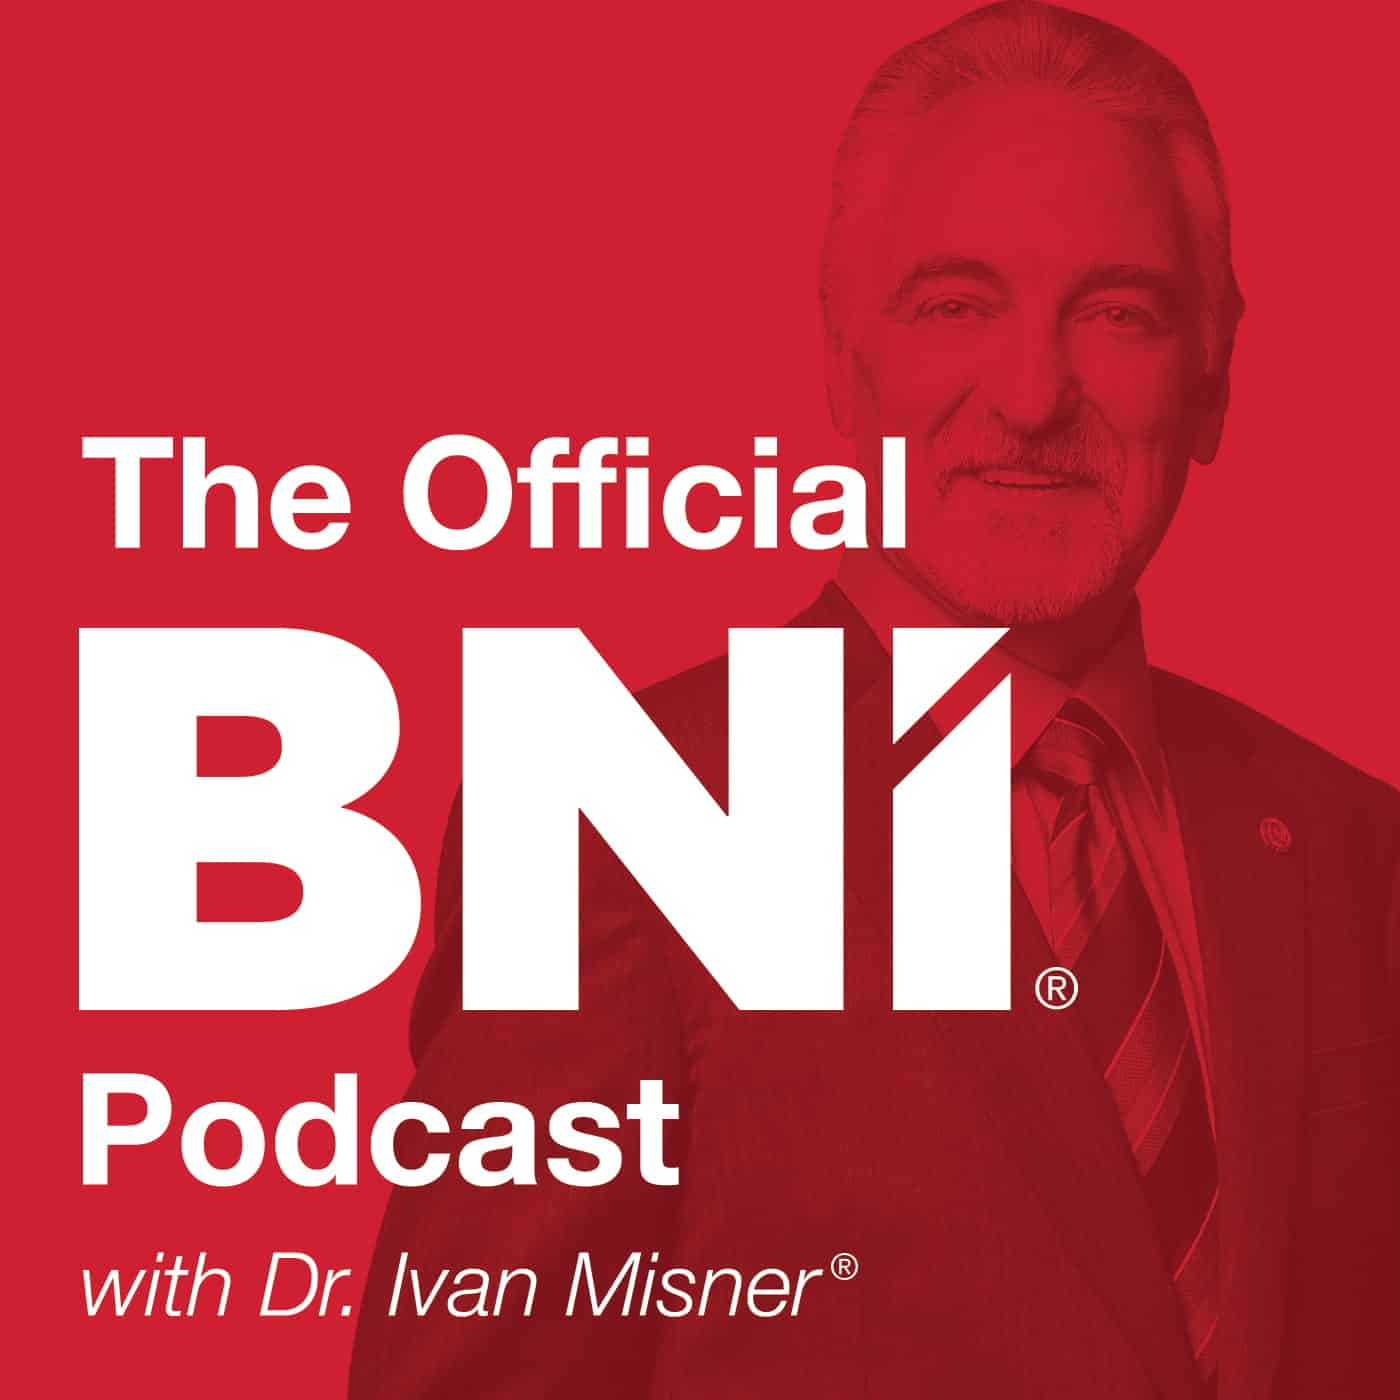 The official business networking podcast with Dr. Ian Misner.